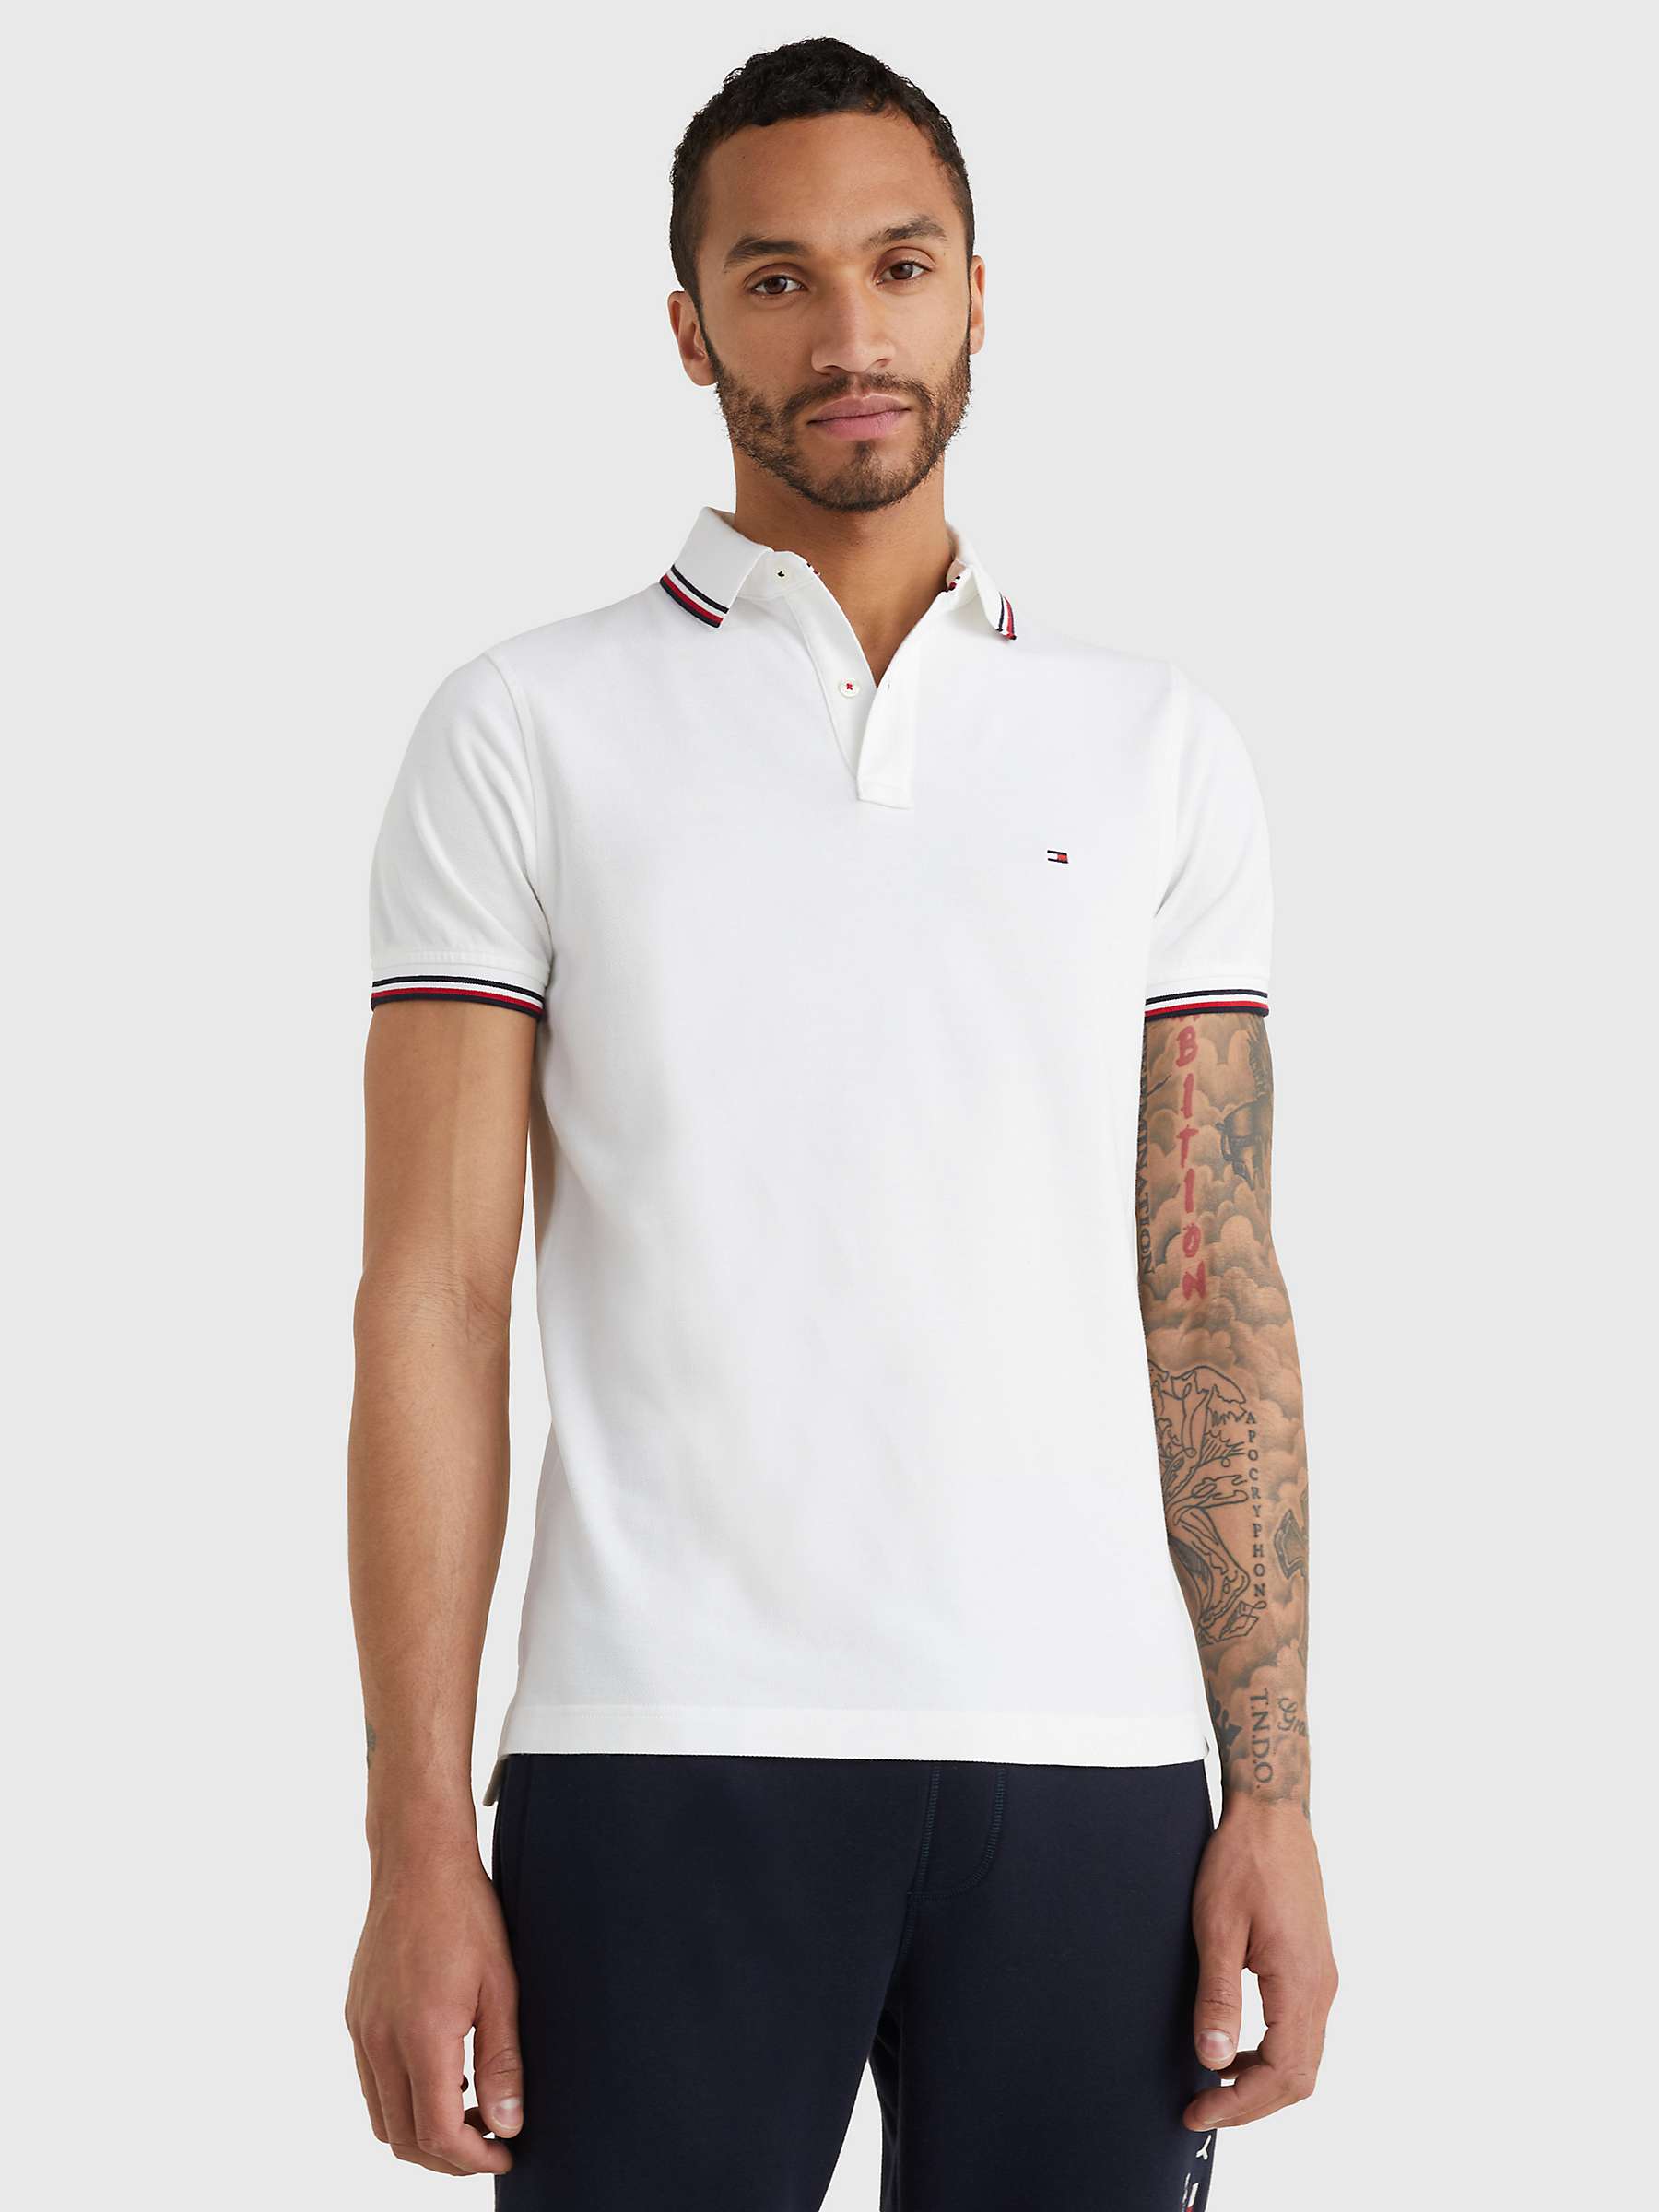 Buy Tommy Hilfiger Tipped Organic Cotton Slim Fit Polo Shirt Online at johnlewis.com